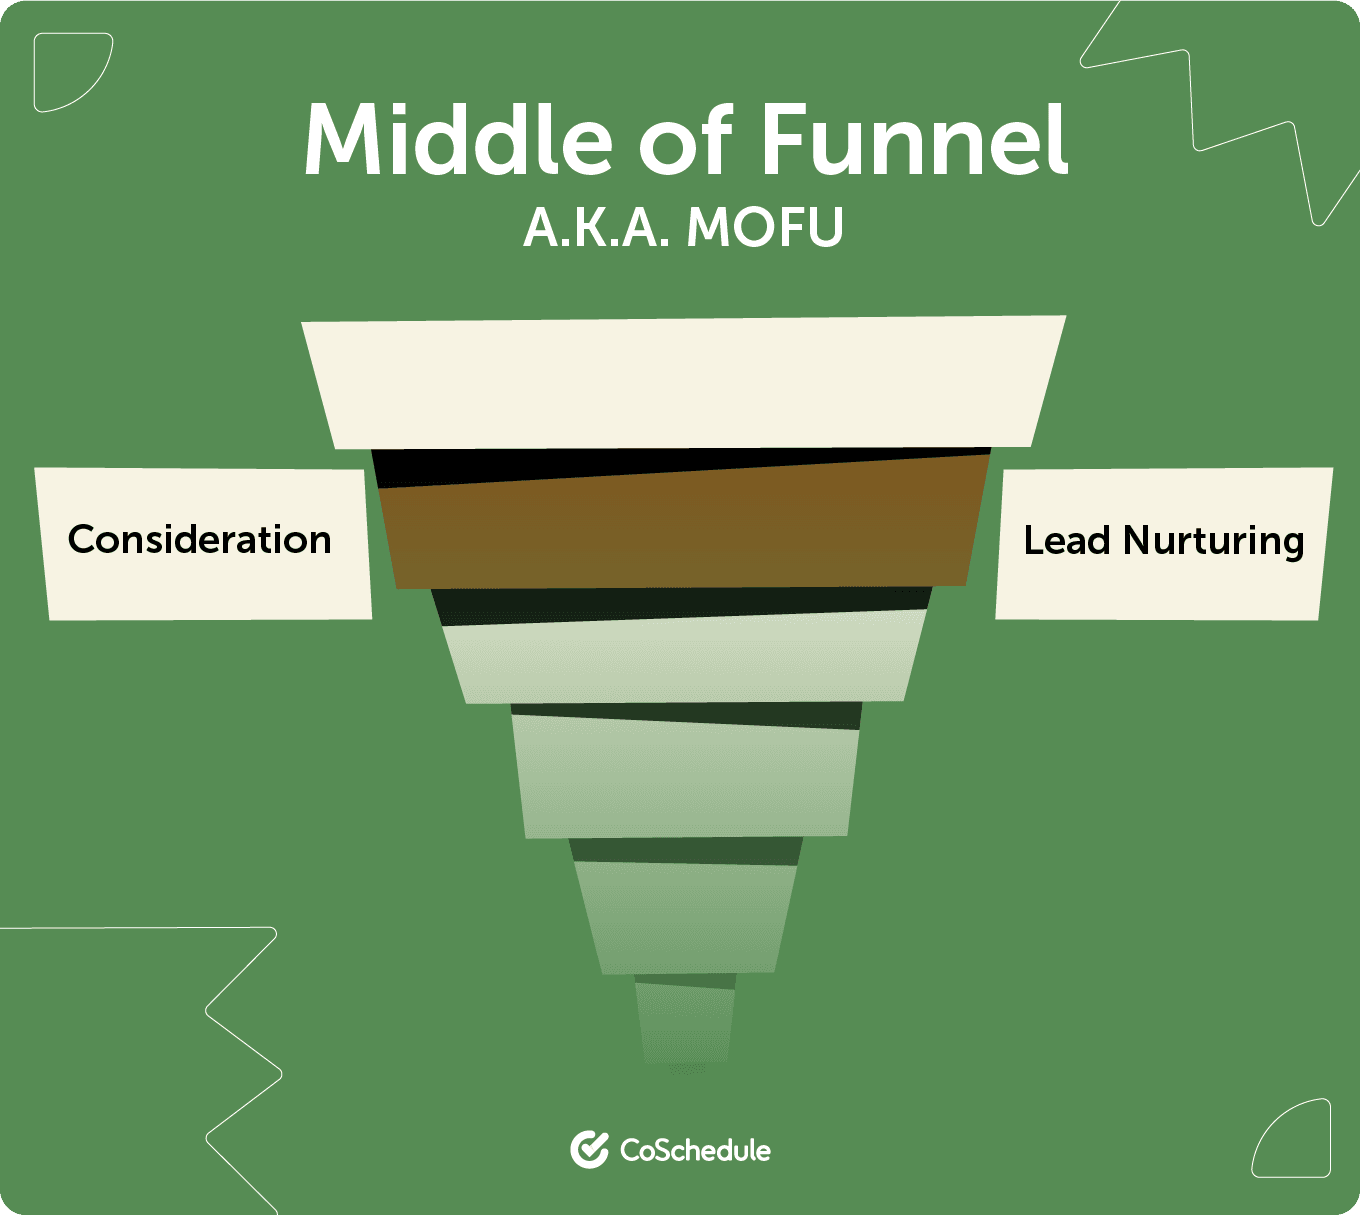 Middle of funnel example by CoSchedule.